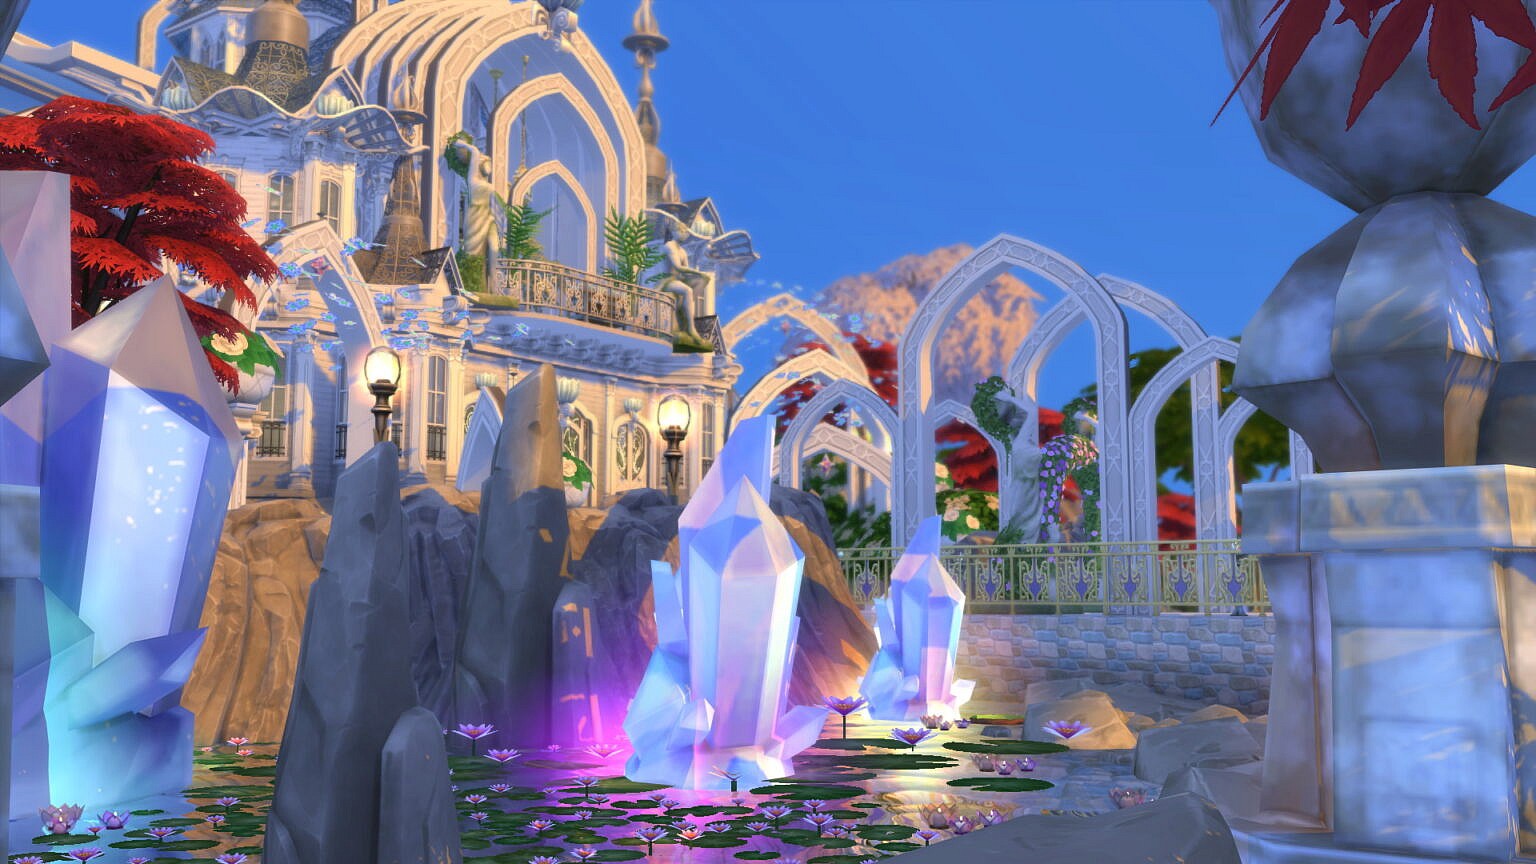 Magical Fairy Castle By Bradybrad7 At Mod The Sims 4 Sims 4 Updates